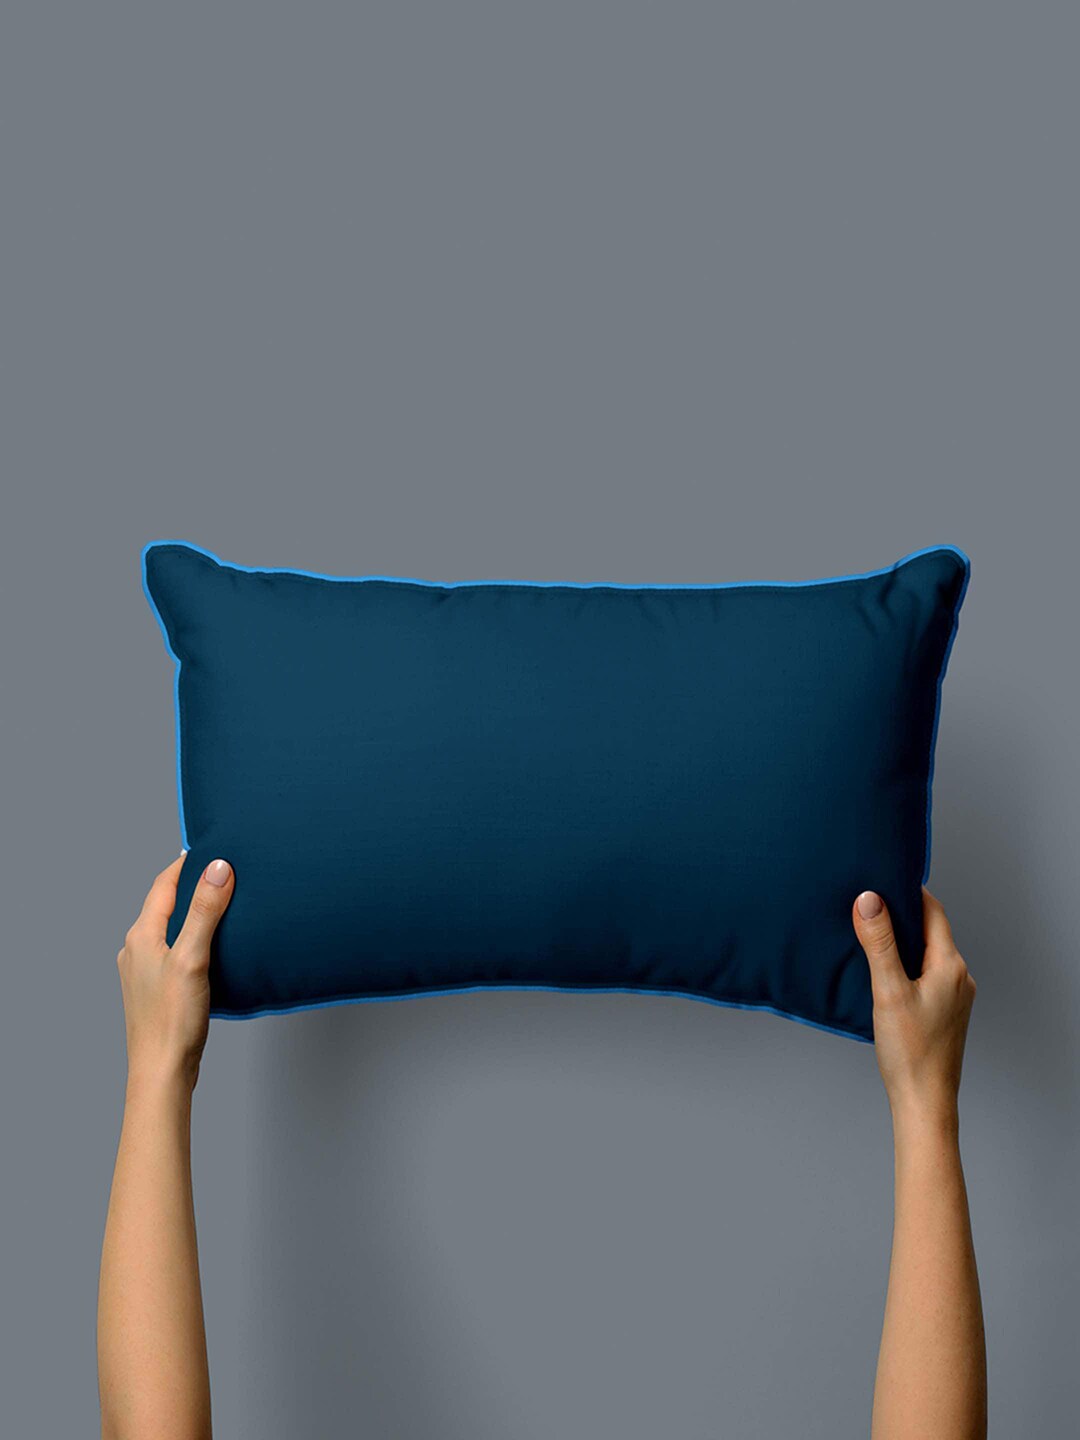 THE WOOD WHITE Solid Cotton Rectangular Pillow Price in India